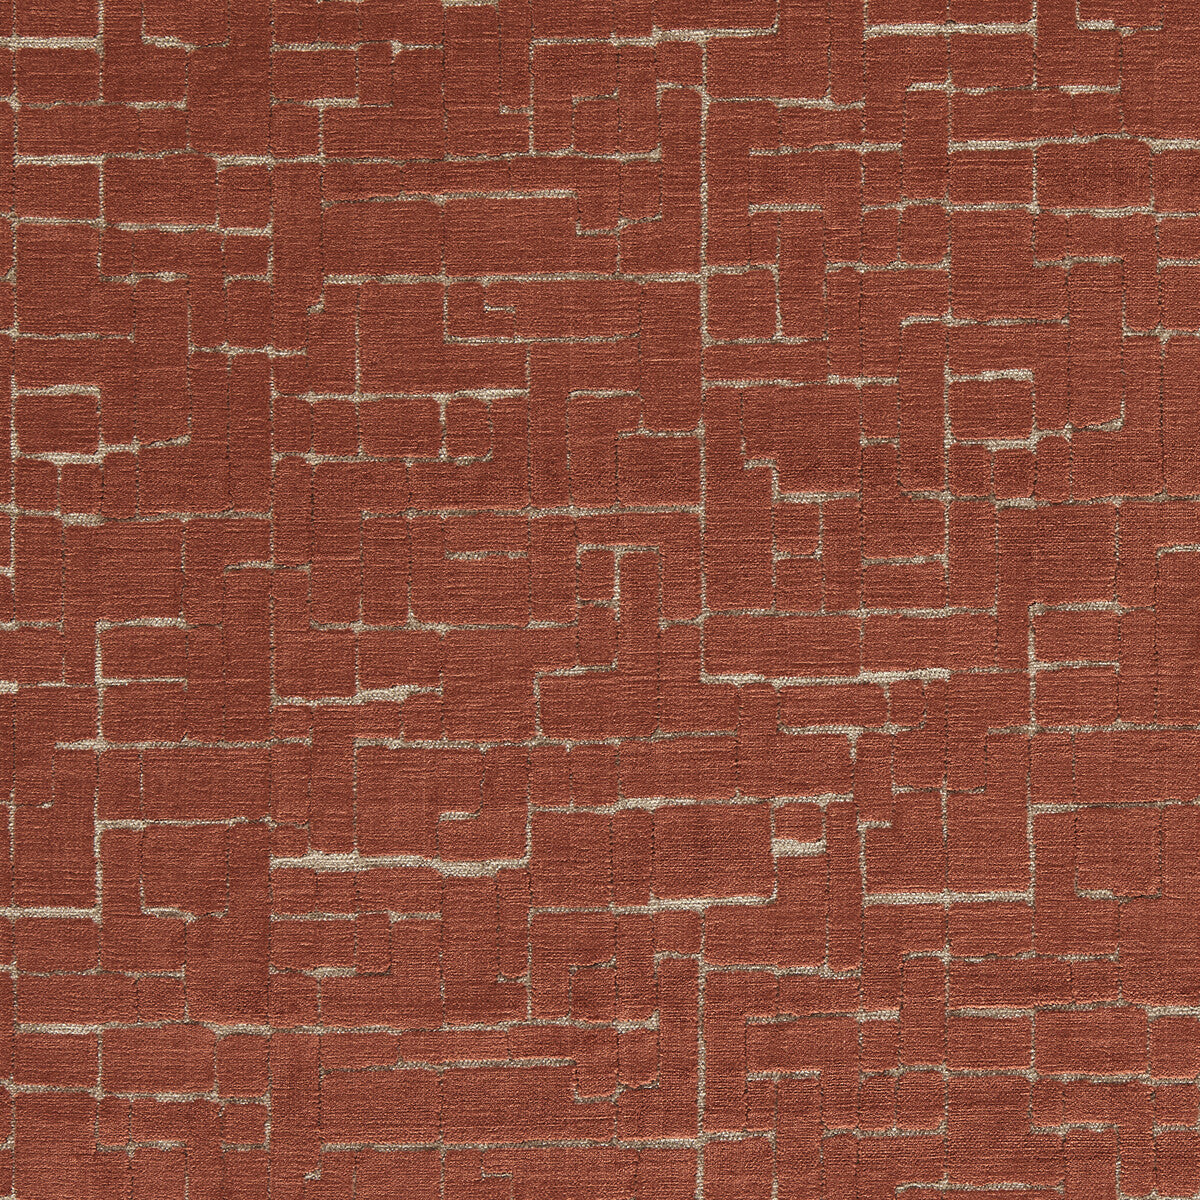 Kupka fabric in copper color - pattern F1685/02.CAC.0 - by Clarke And Clarke in the Urban collection